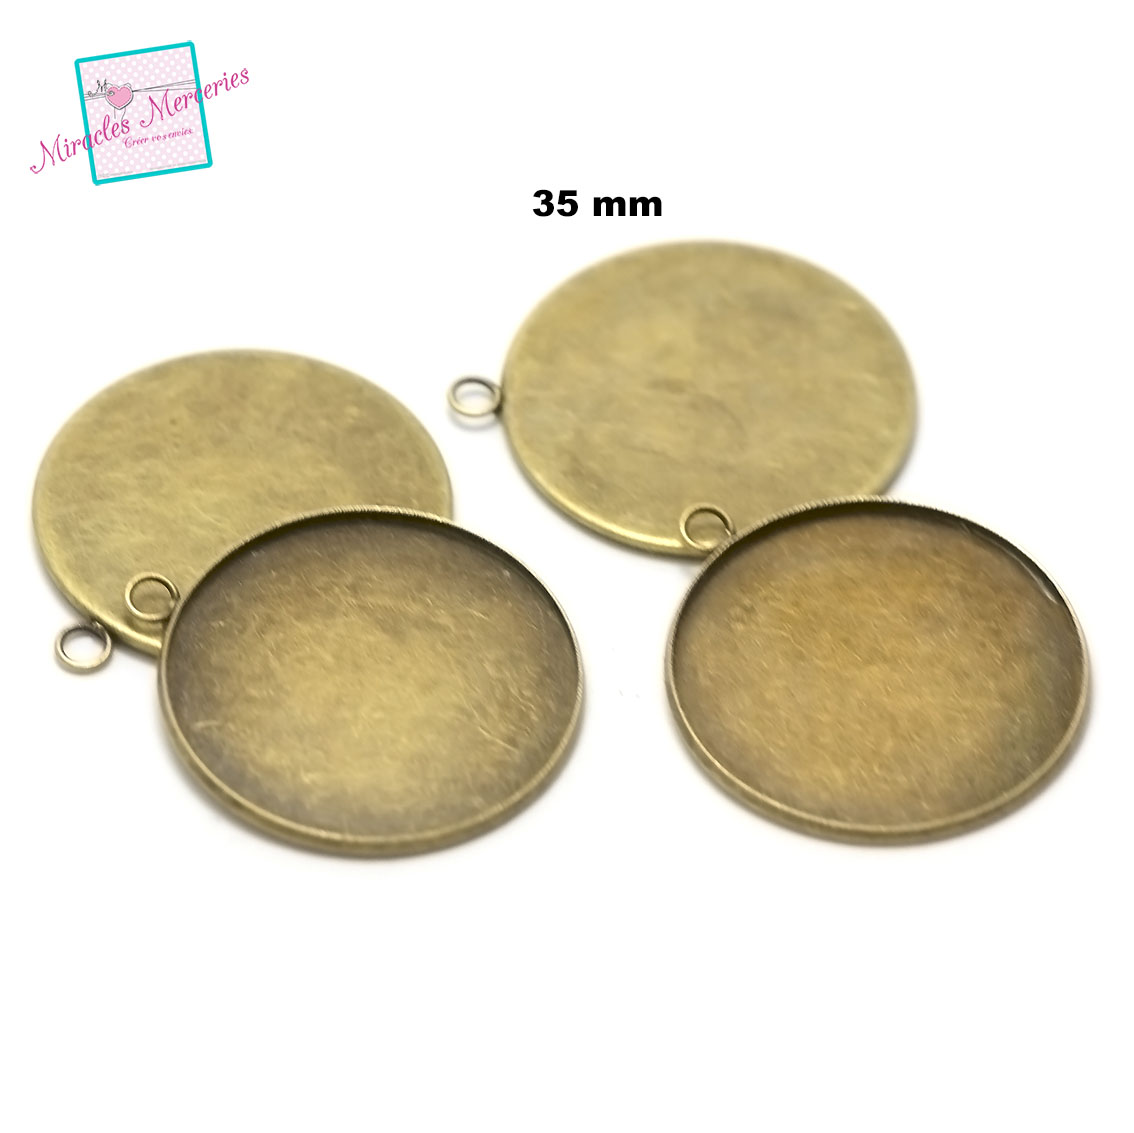 4 supports cabochon pendentif ronde 35 mm,bronze